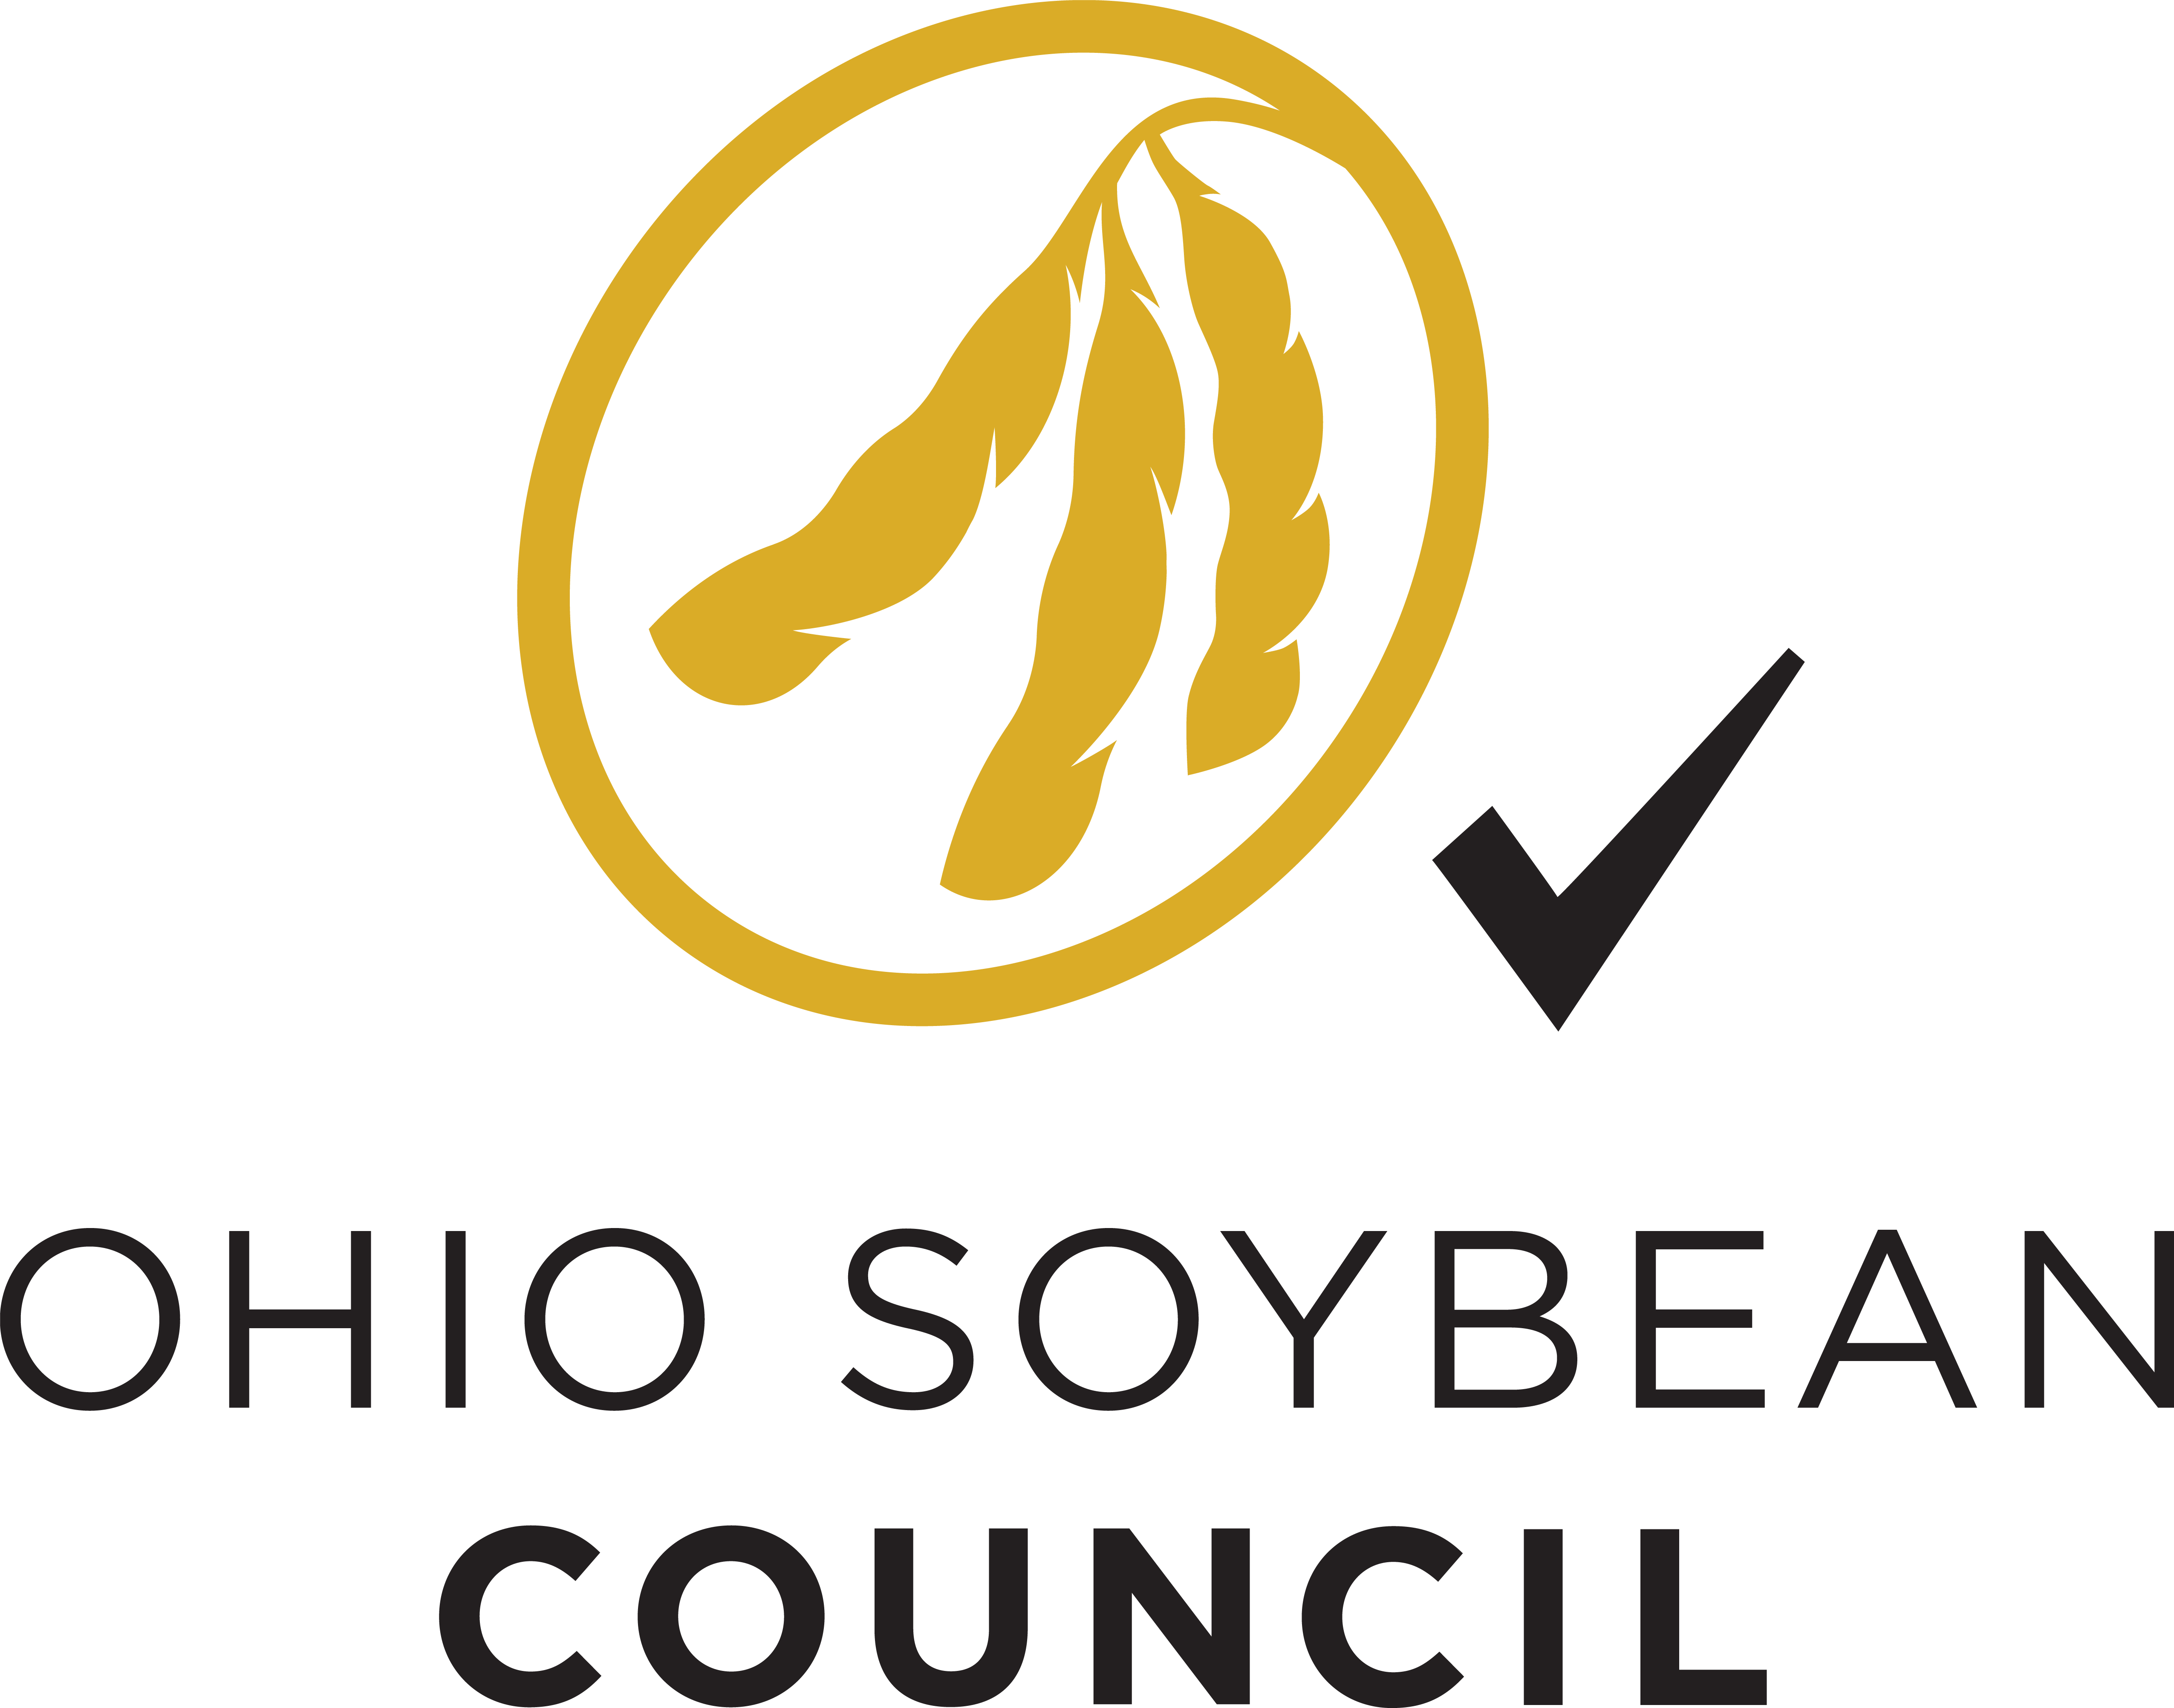 OHSOY Council Logo_Stacked_CMYK